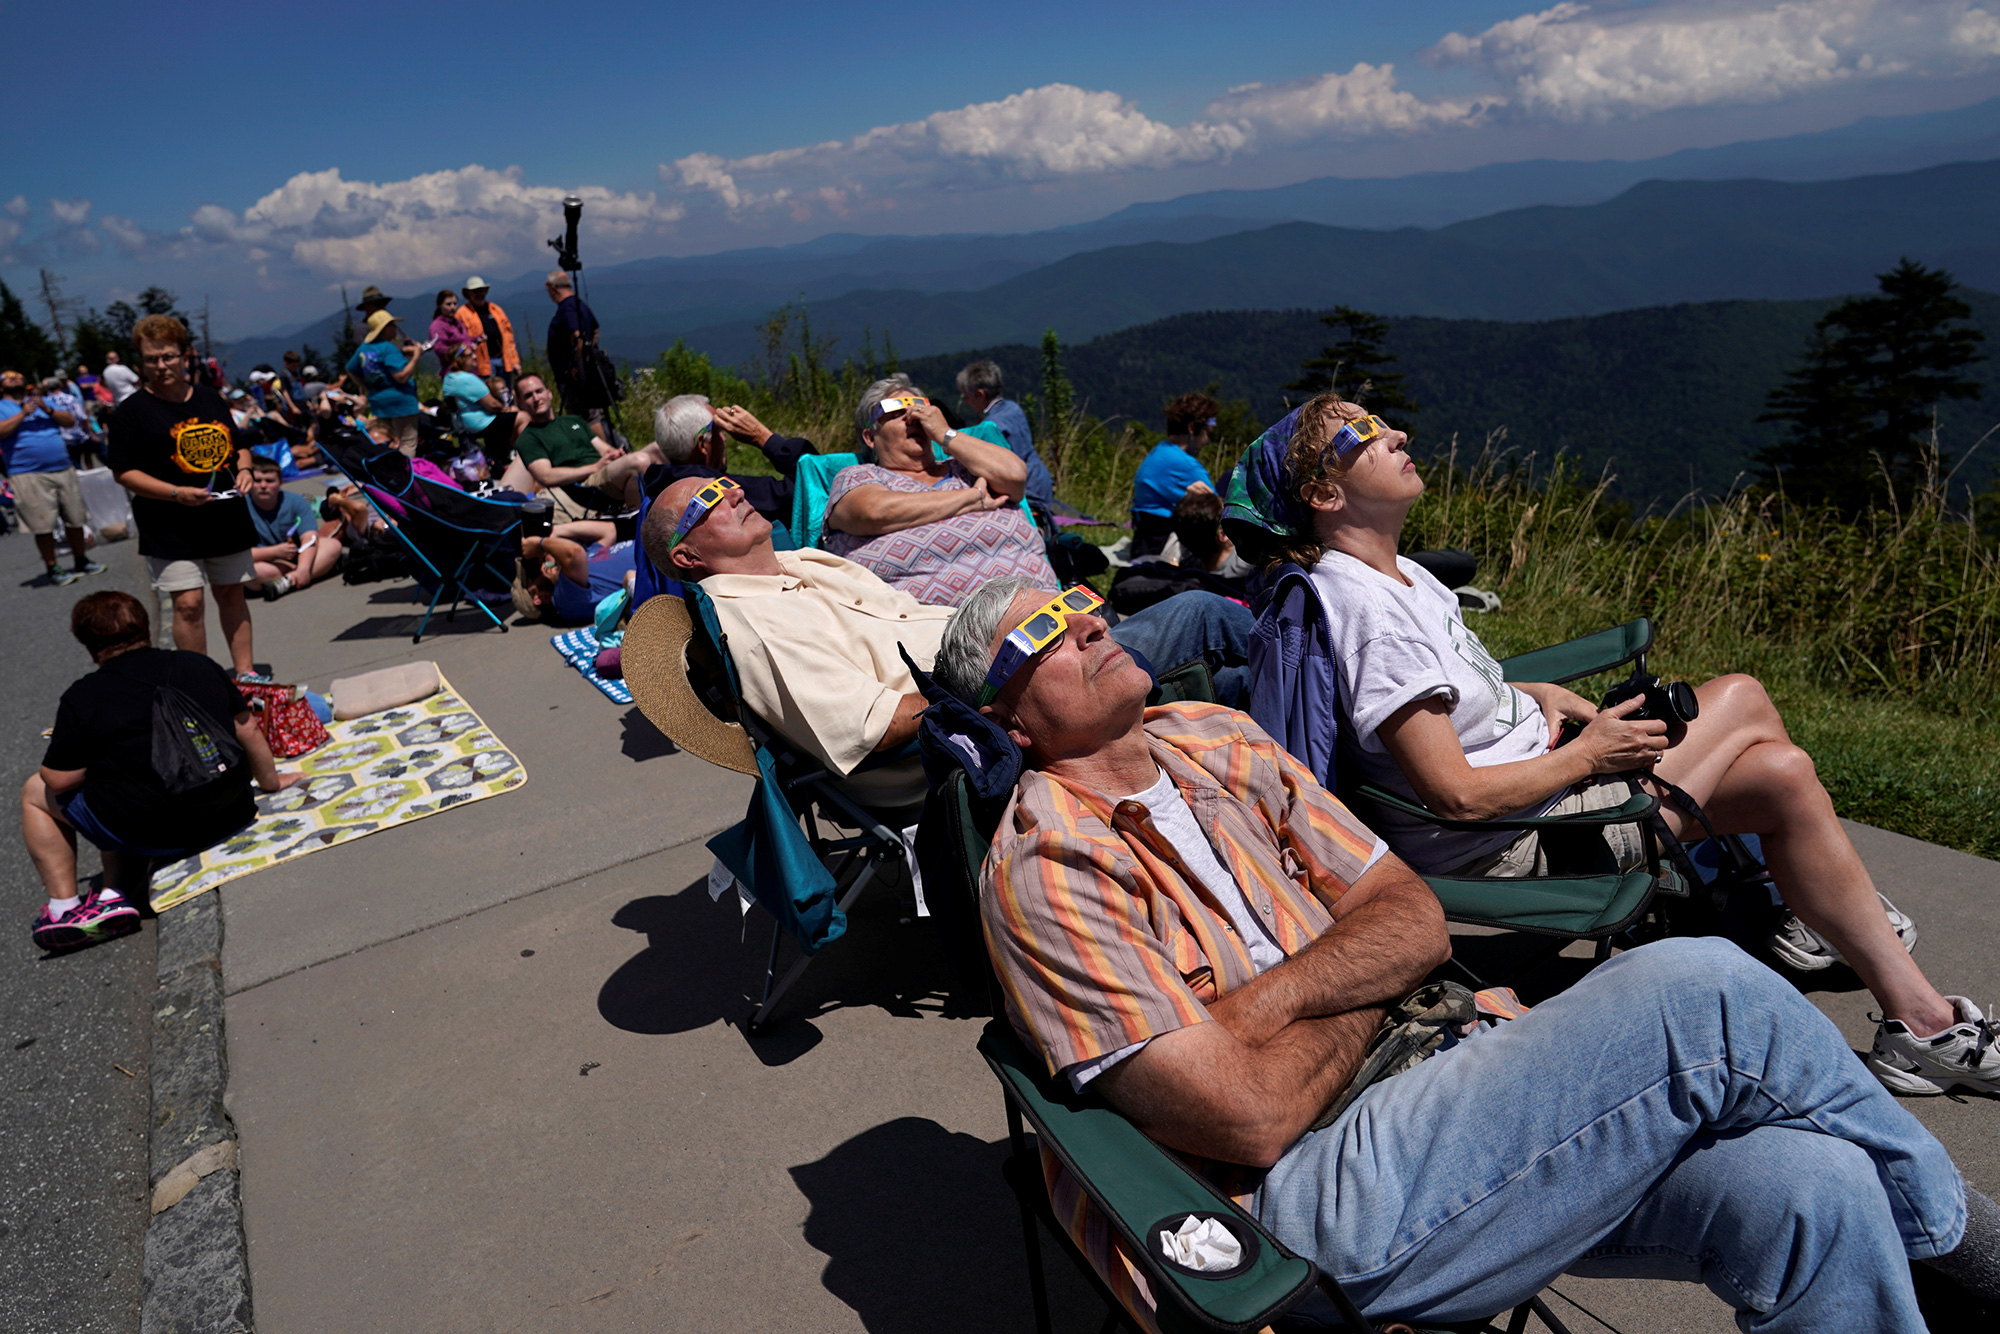 People watch as the solar eclipse approaches totality from Clingmans Dome, the highest point in Great Smoky Mountains National Park, on August 21, 2017. 